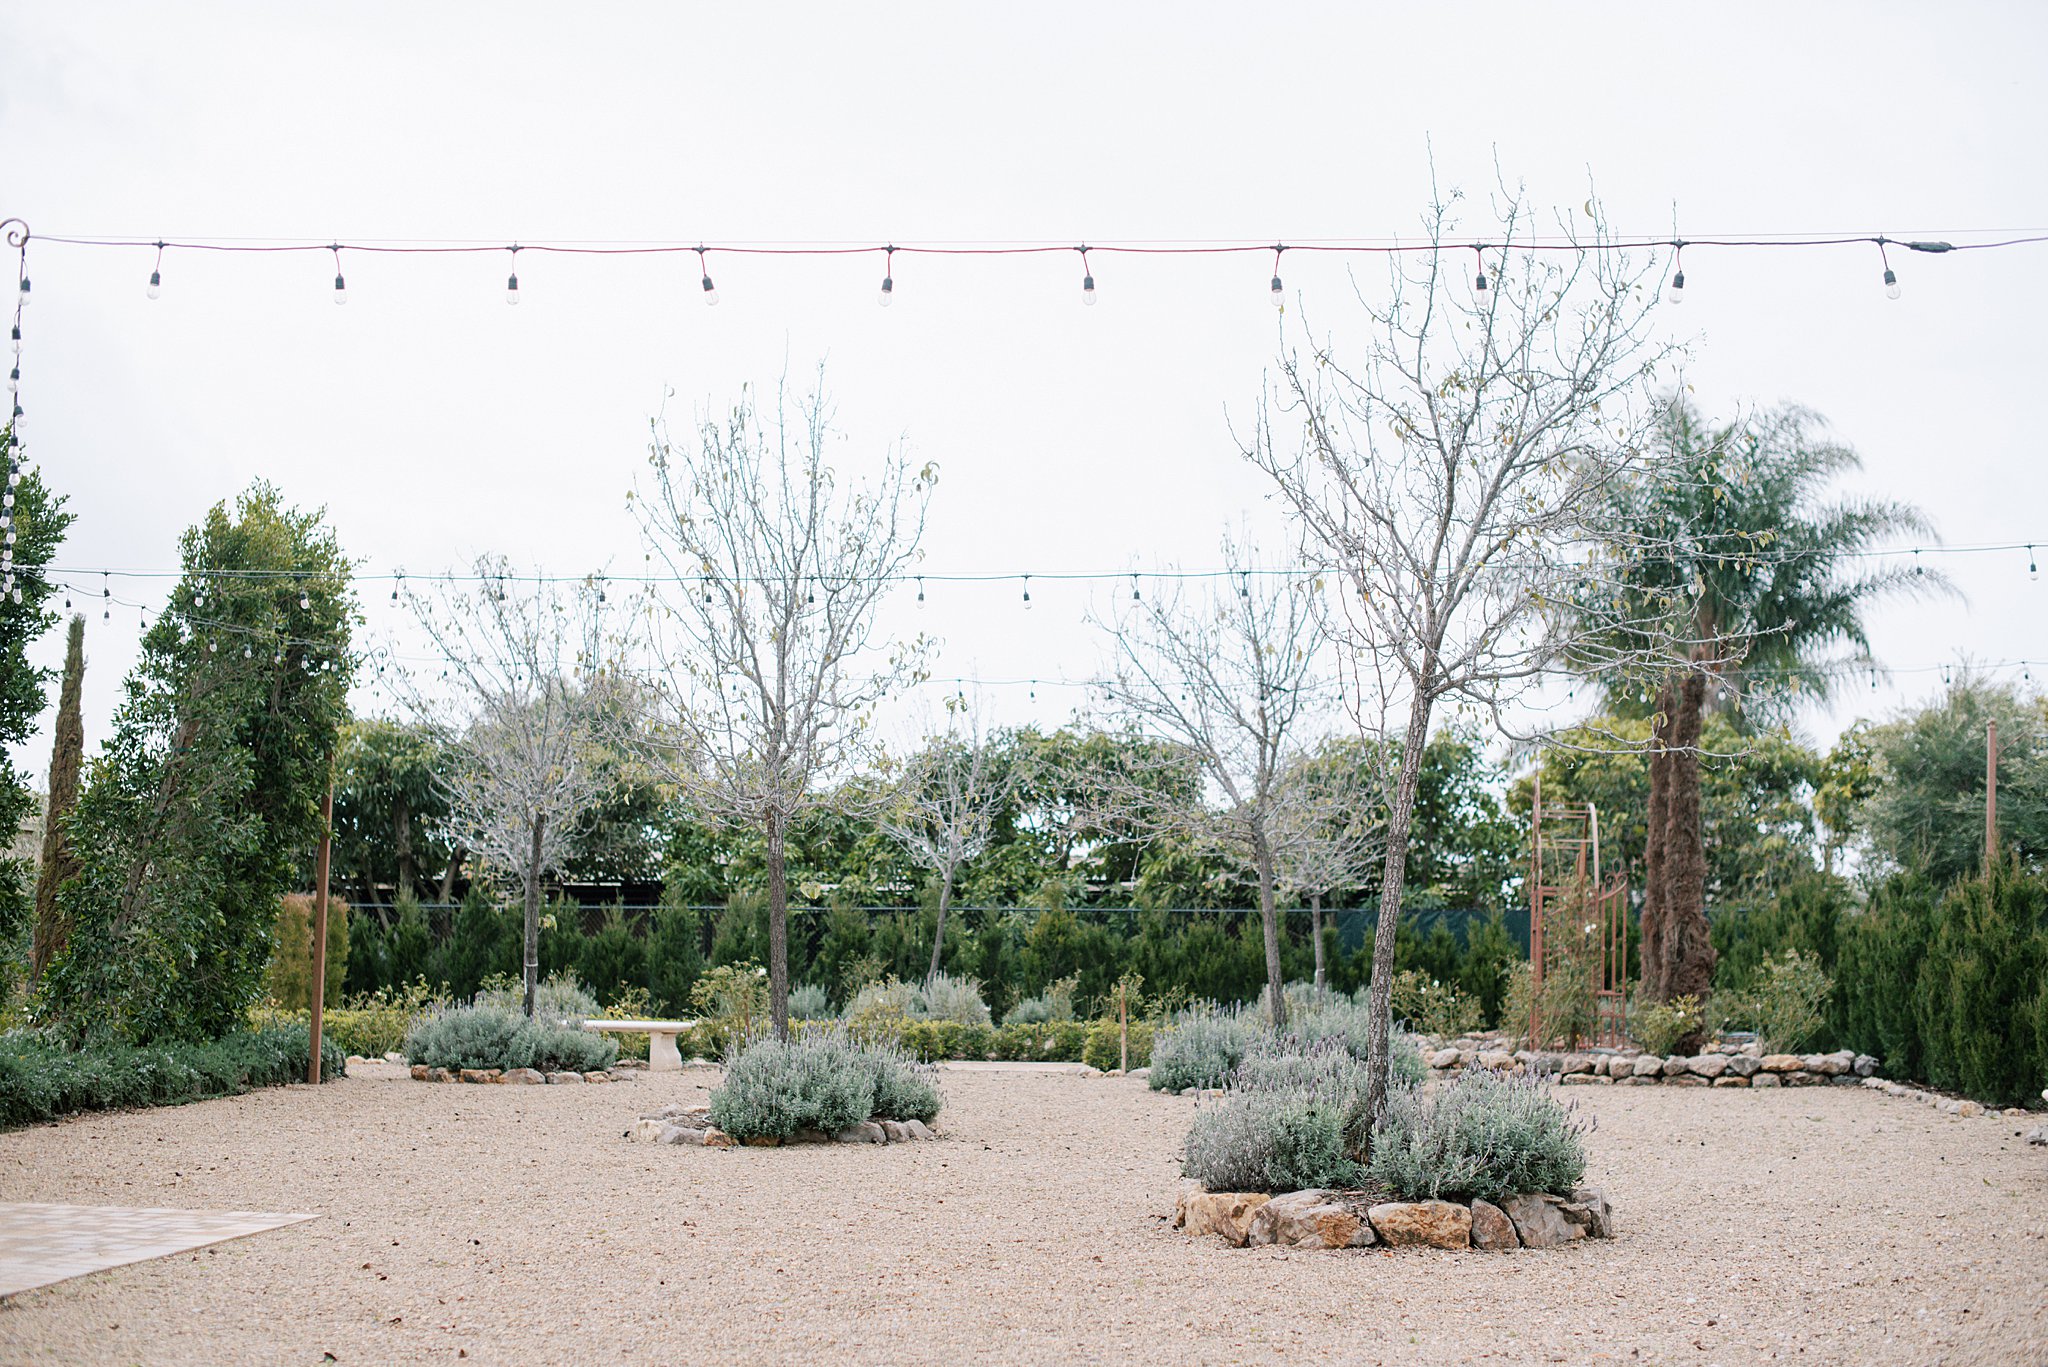 The open cocktail hour area at Tuscan Rose Ranch features thoughtfully planted trees surrounded by lavender plants.